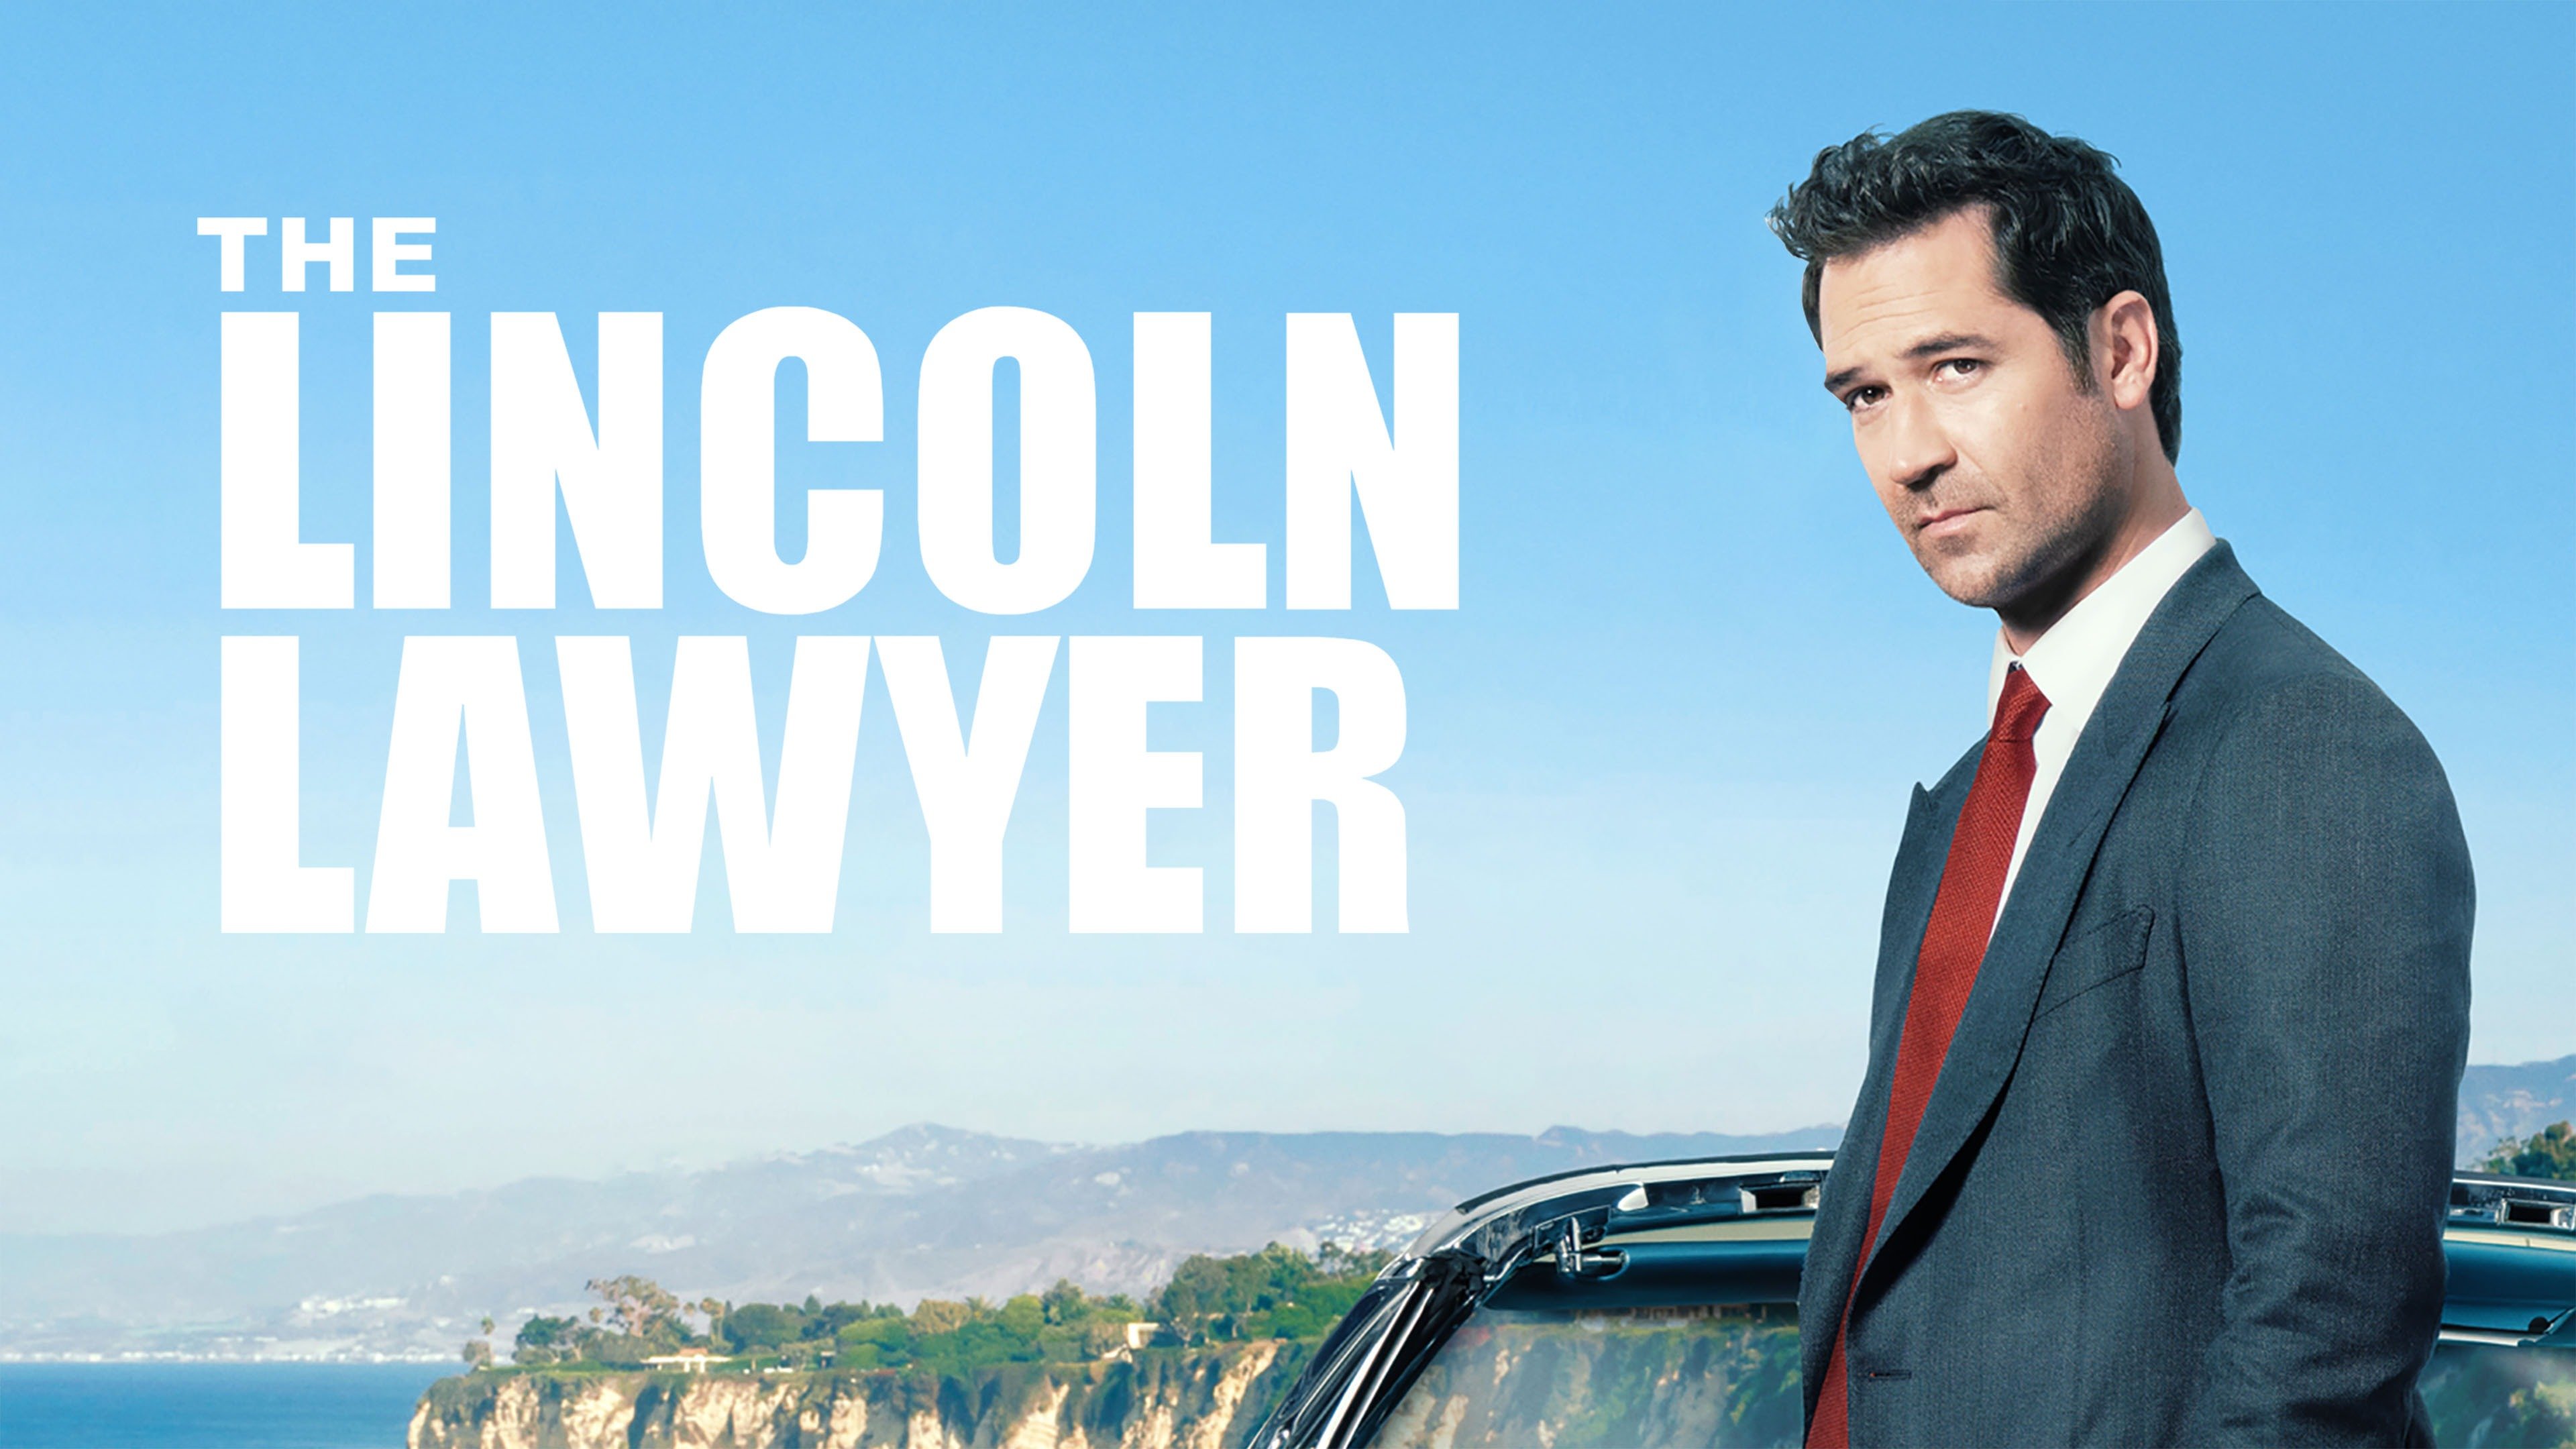 Finished The Lincoln Lawyer Here Are 7 Legal Dramas While We Wait For Season 2 Techradar